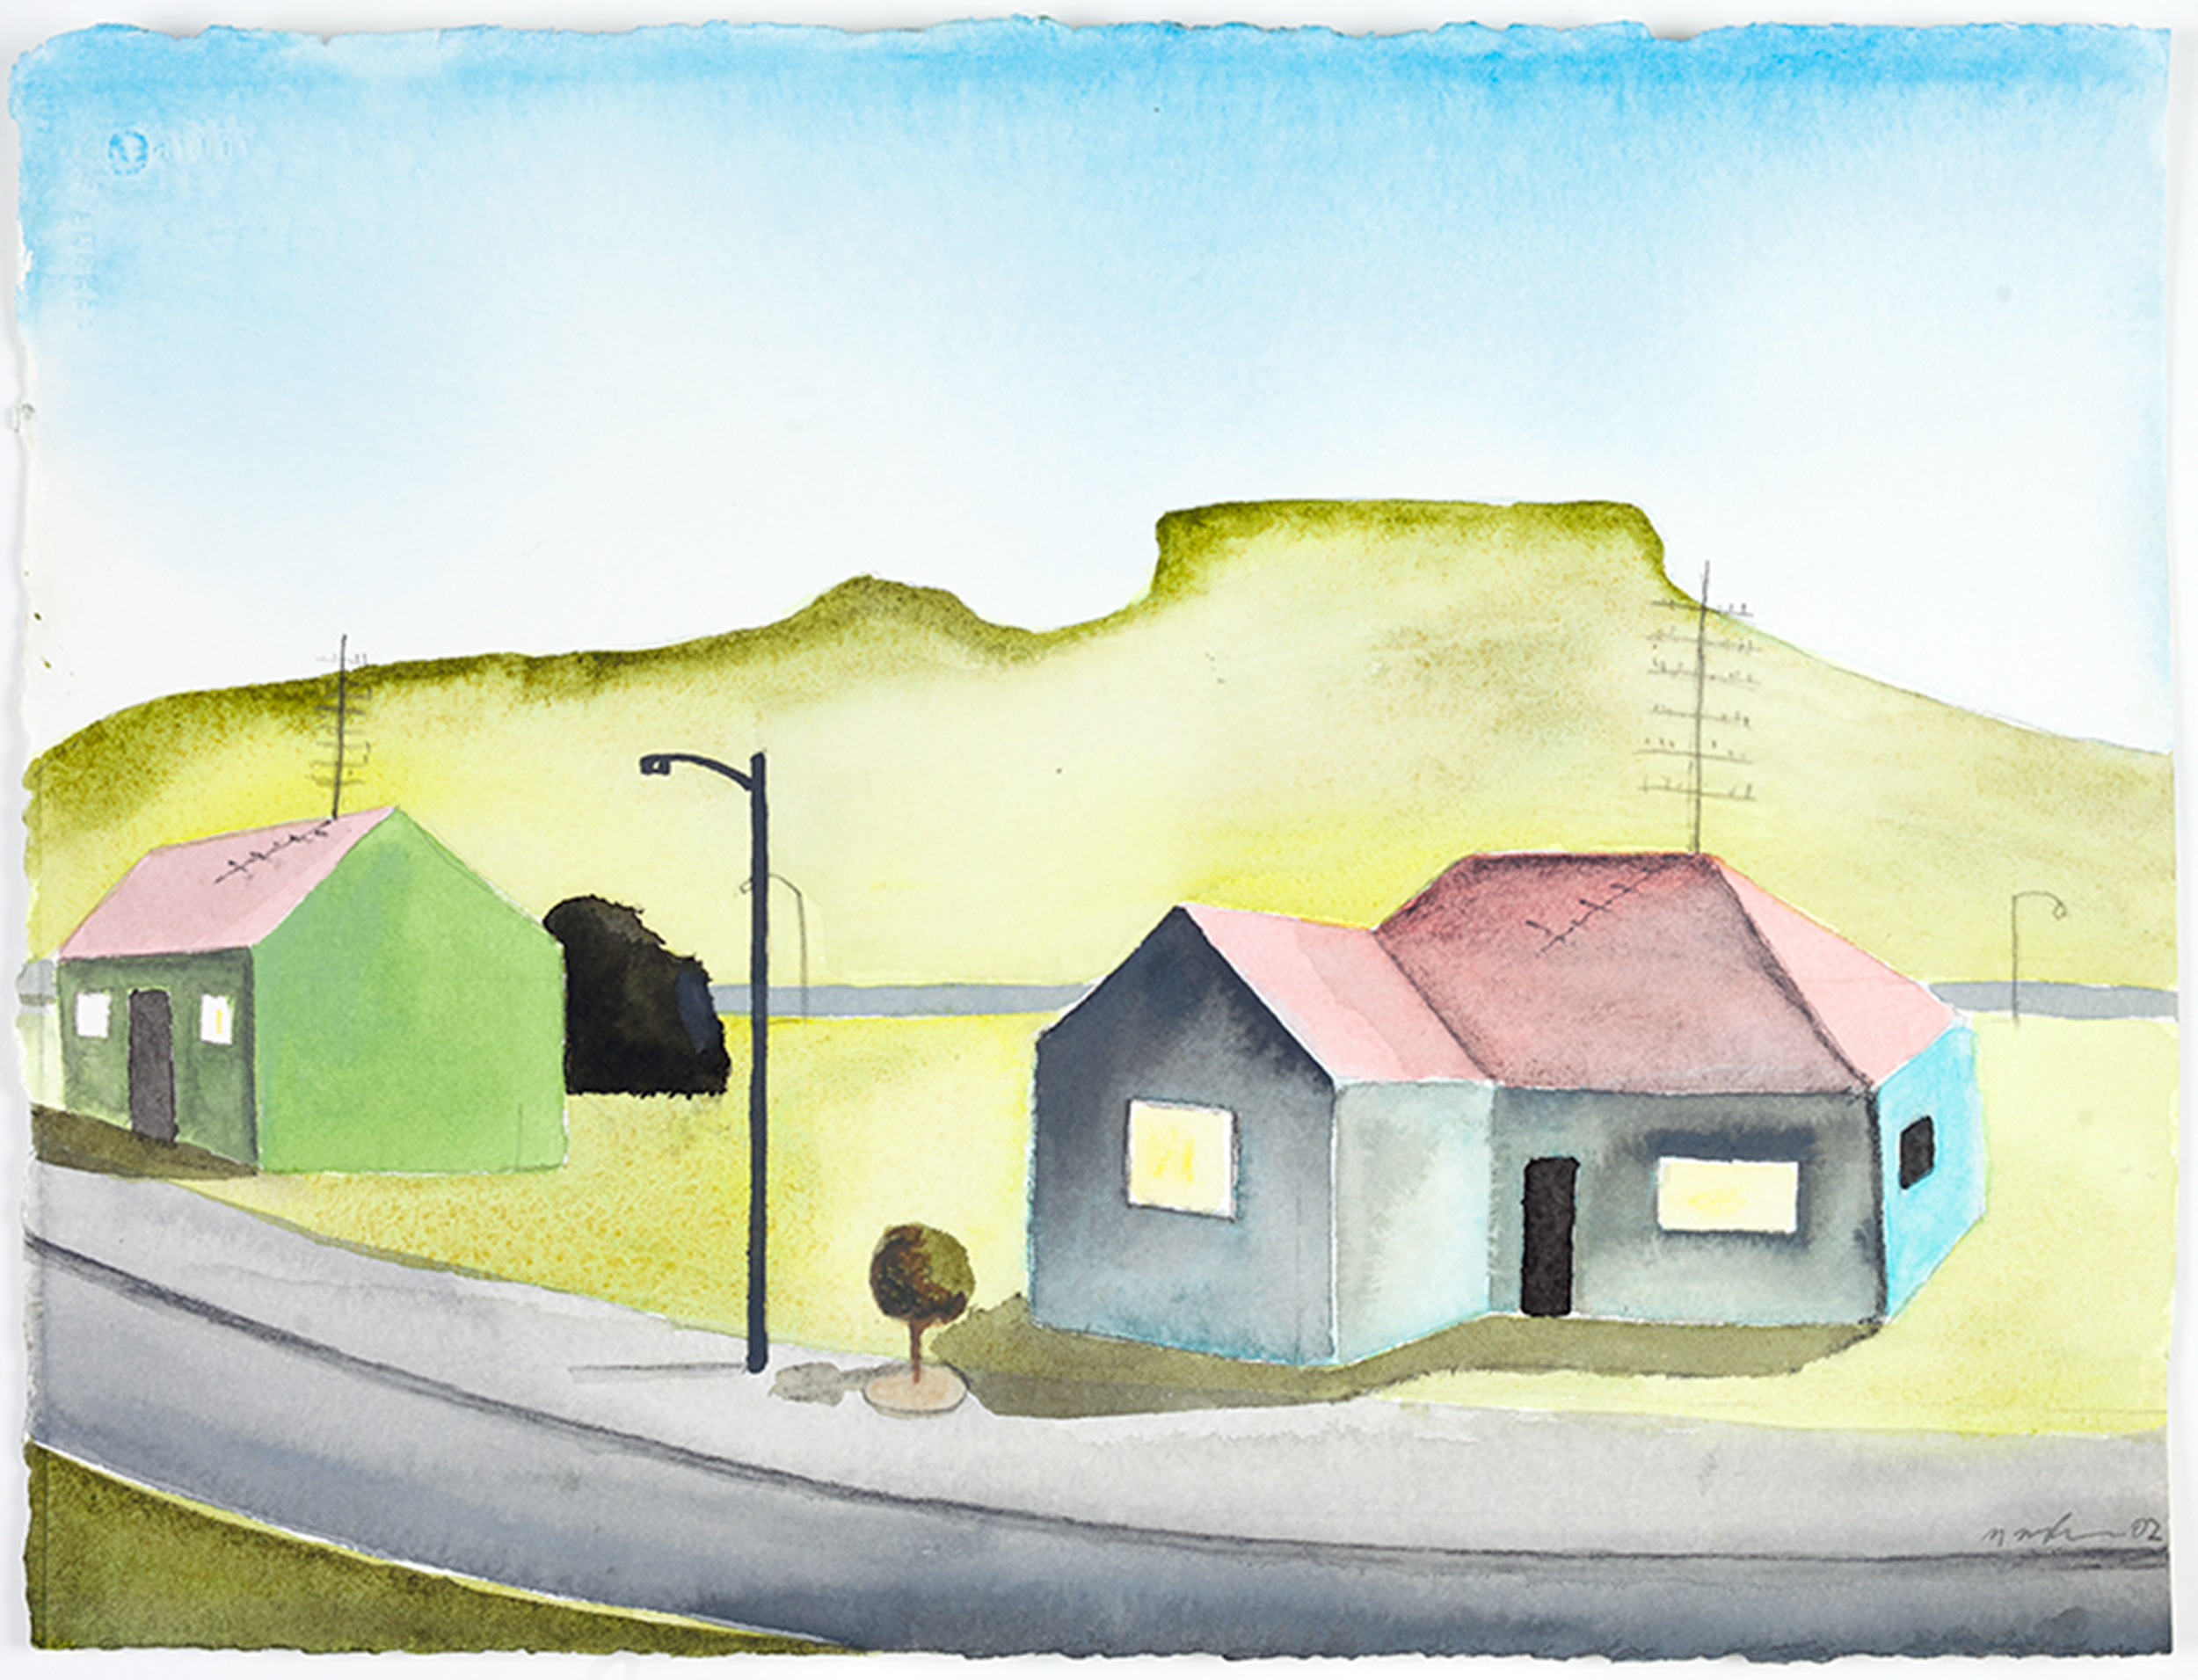 Small scale watercolour artwork depicting a simple suburban street scene, with the outline of the Illawarra escarpment in the background. There are two homes, one is green and the other is blue, they both have red roofs. The road is great and curves infront of the homes and there is a small tree and black lamp post between them.